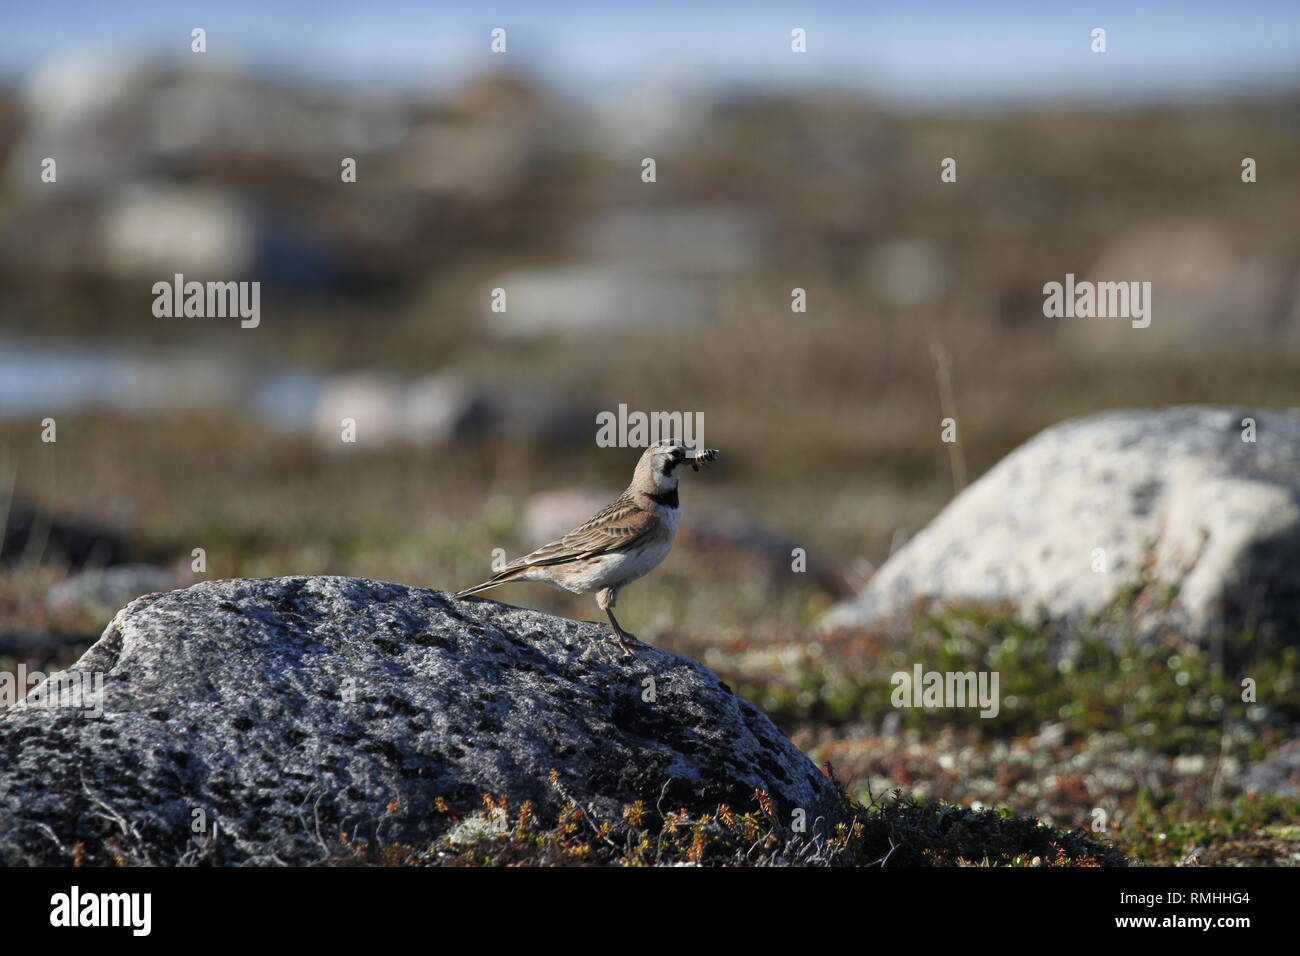 Horned Lark or shore lark found standing on a rock in the arctic tundra with a bug in its mouth Stock Photo